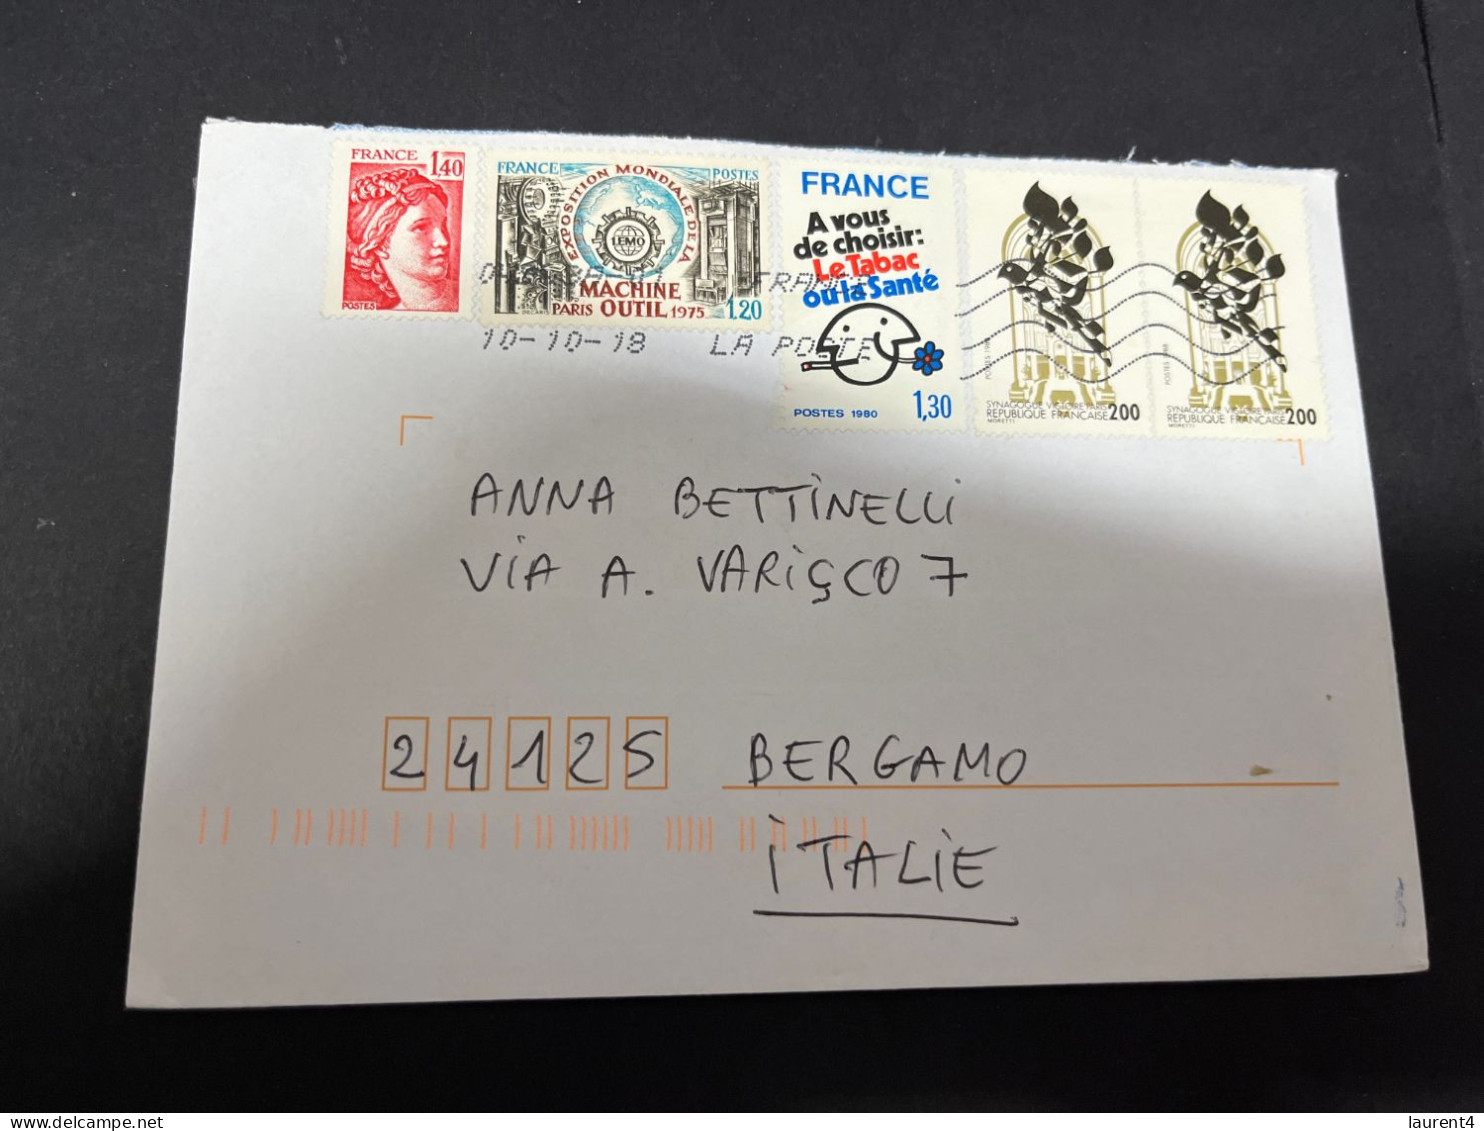 25-3-2024 (4 Y 4) 2 Letter Posted From France To Italy (with Many Stamps - 1 No Postmark) - Cartas & Documentos